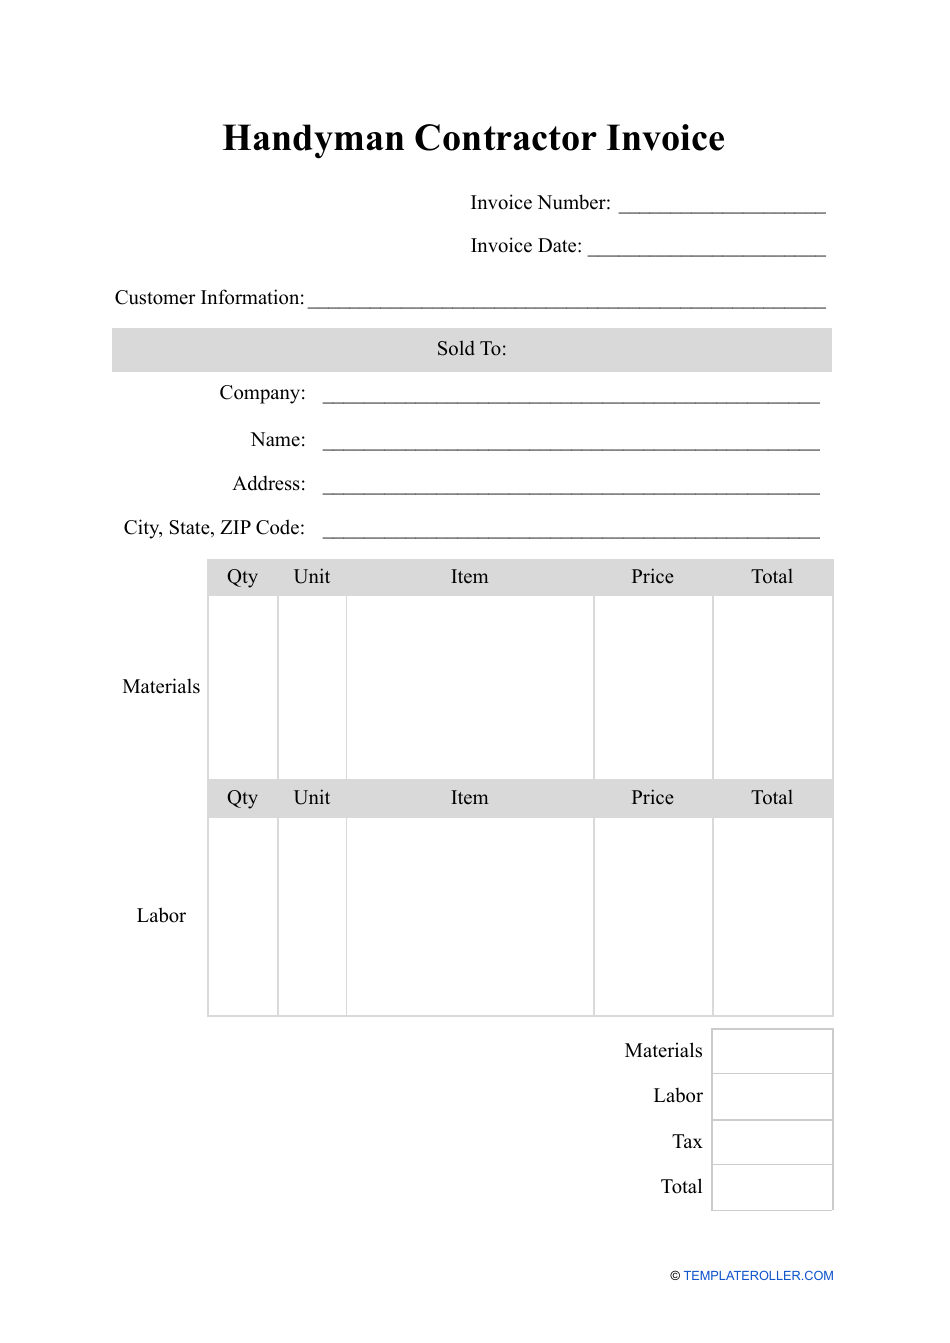 Handyman Contractor Invoice Template, Page 1